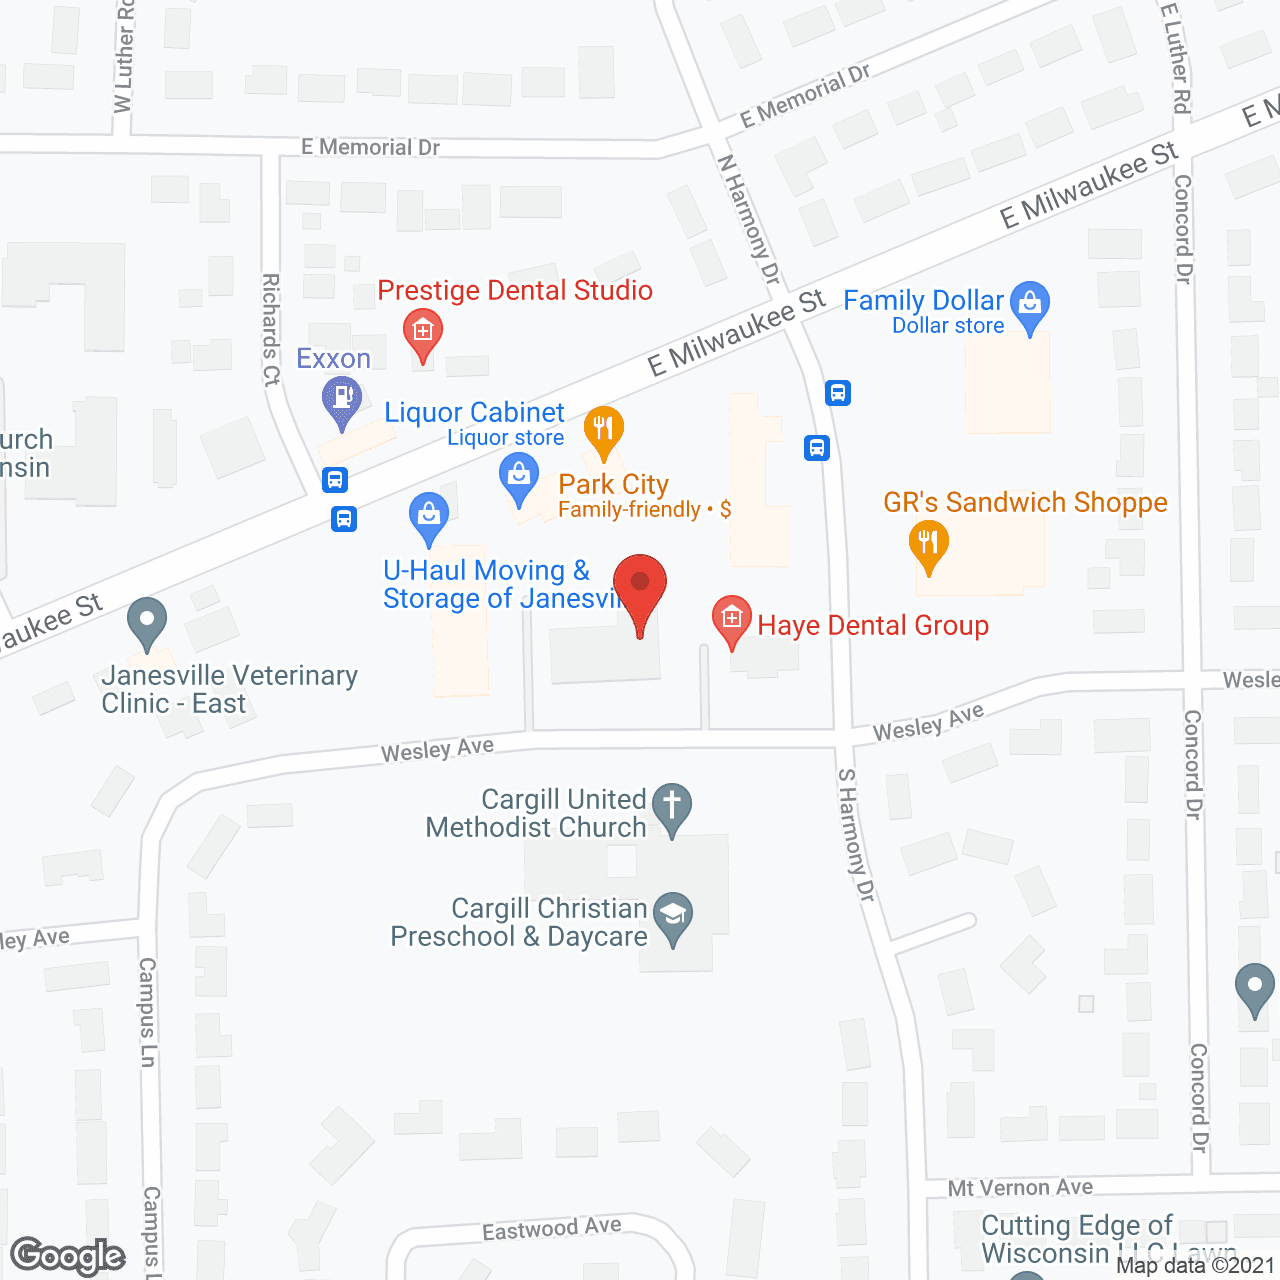 Wesley Avenue Apartments in google map